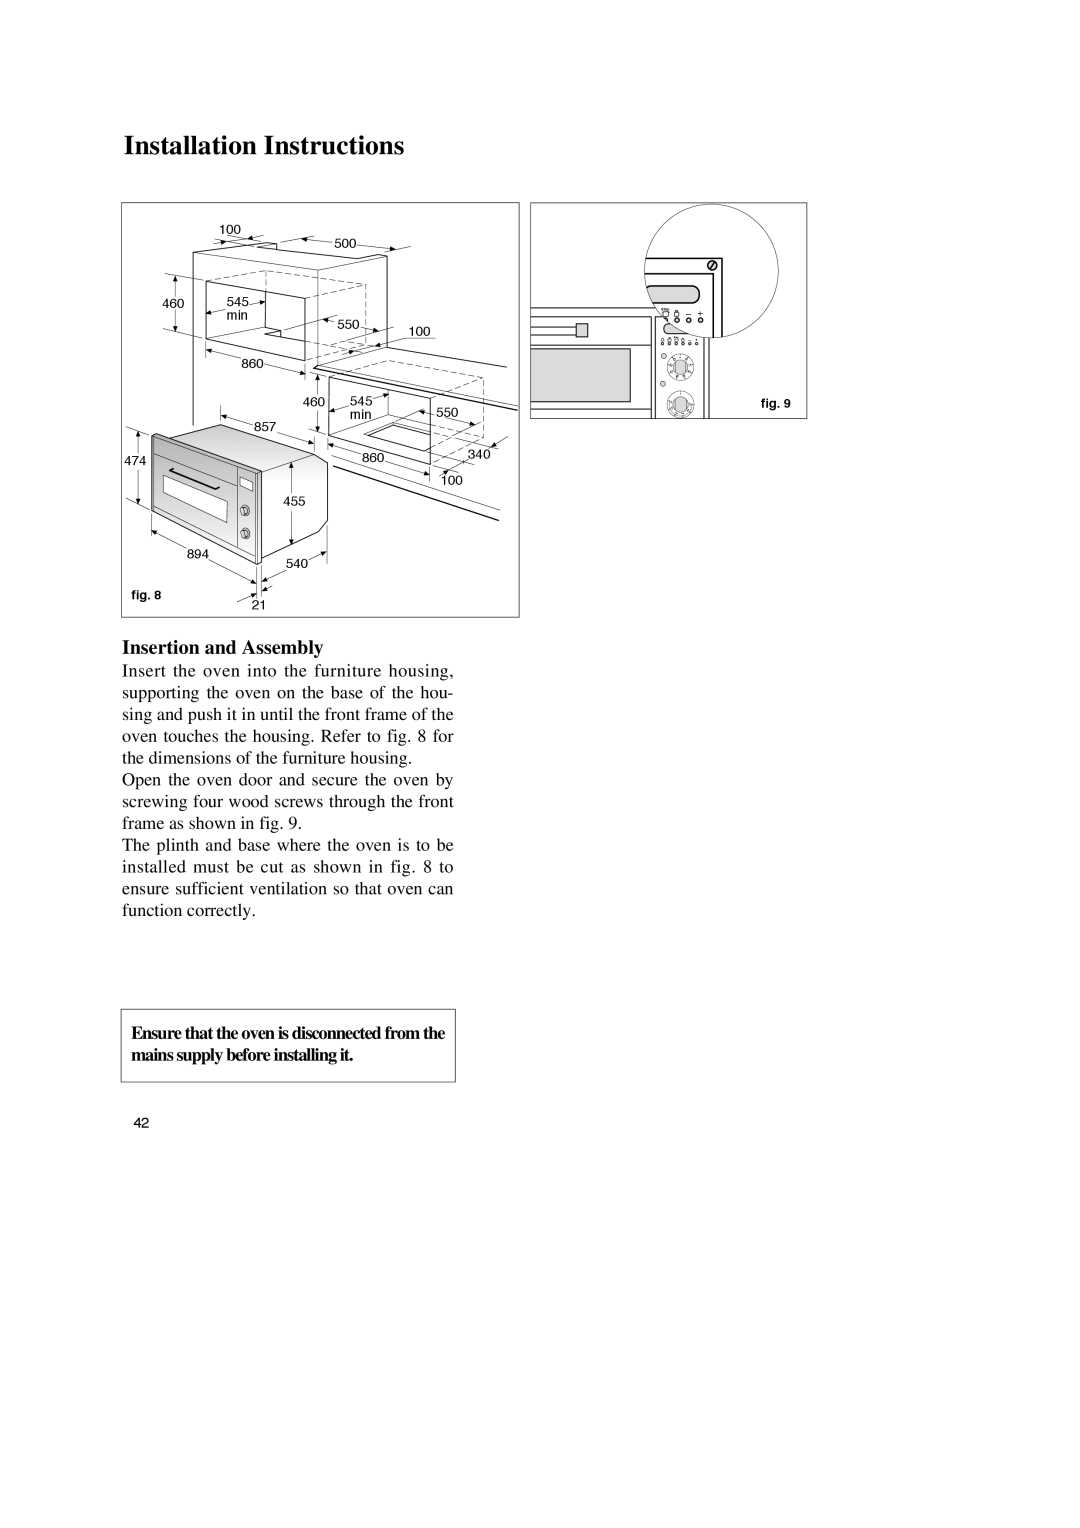 Zanussi ZBM 799 manual Installation Instructions, Insertion and Assembly 